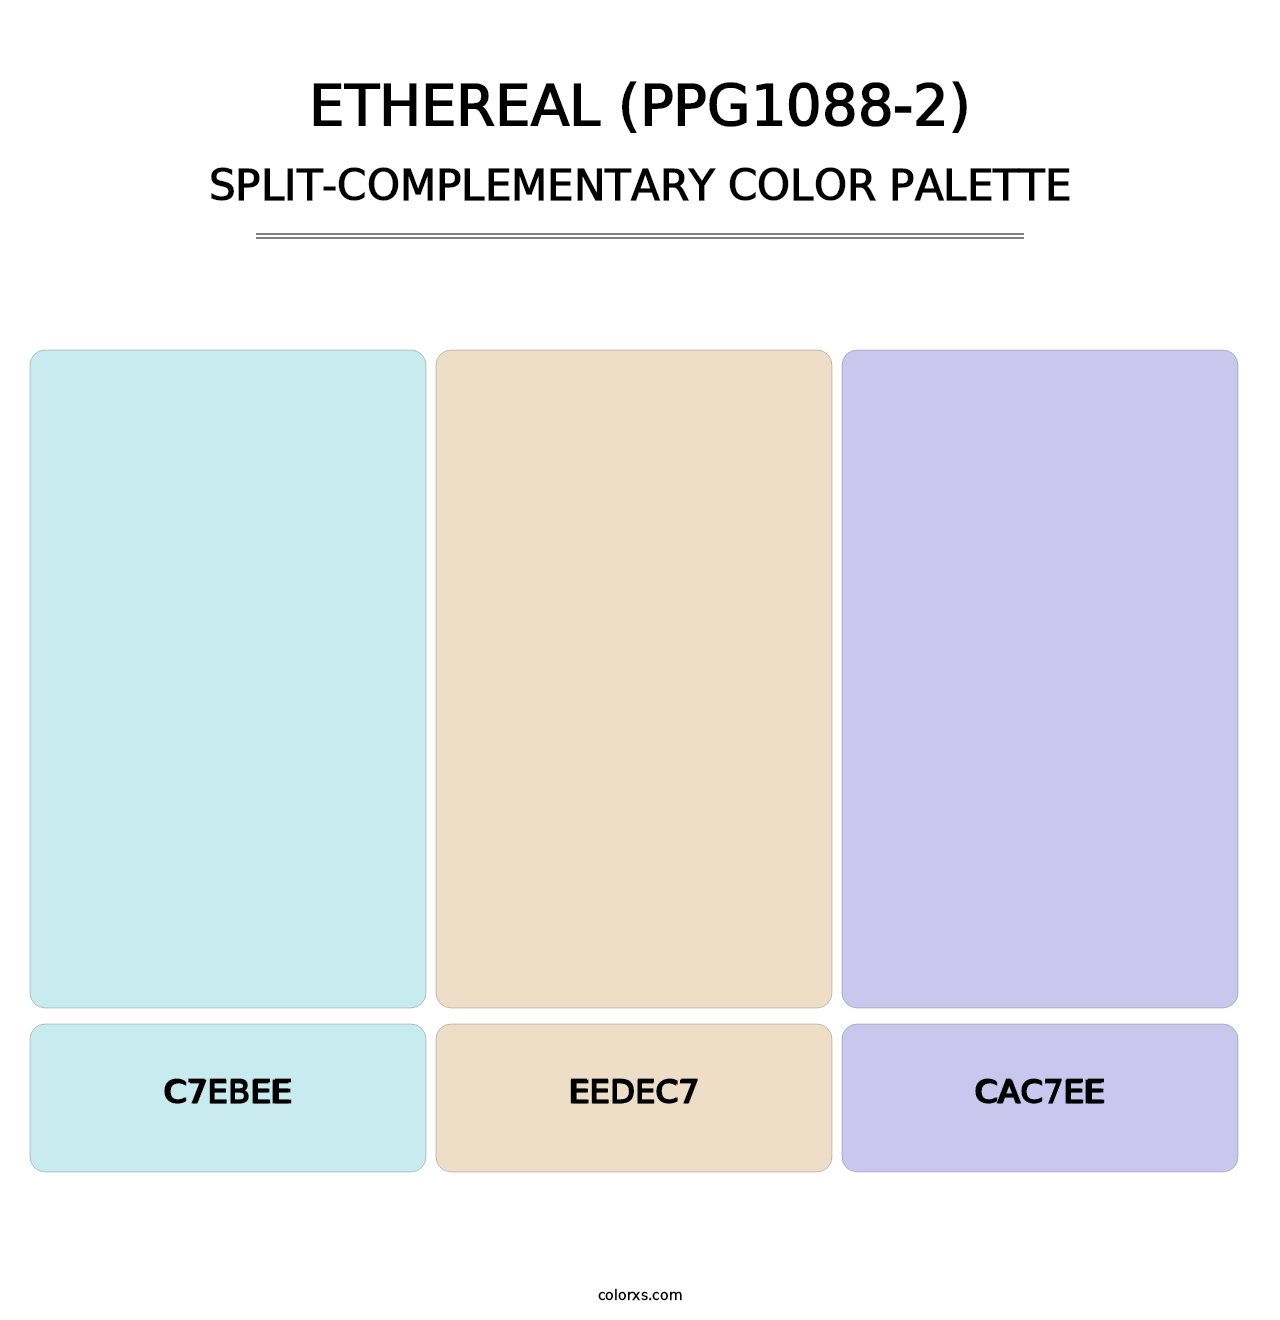 Ethereal (PPG1088-2) - Split-Complementary Color Palette